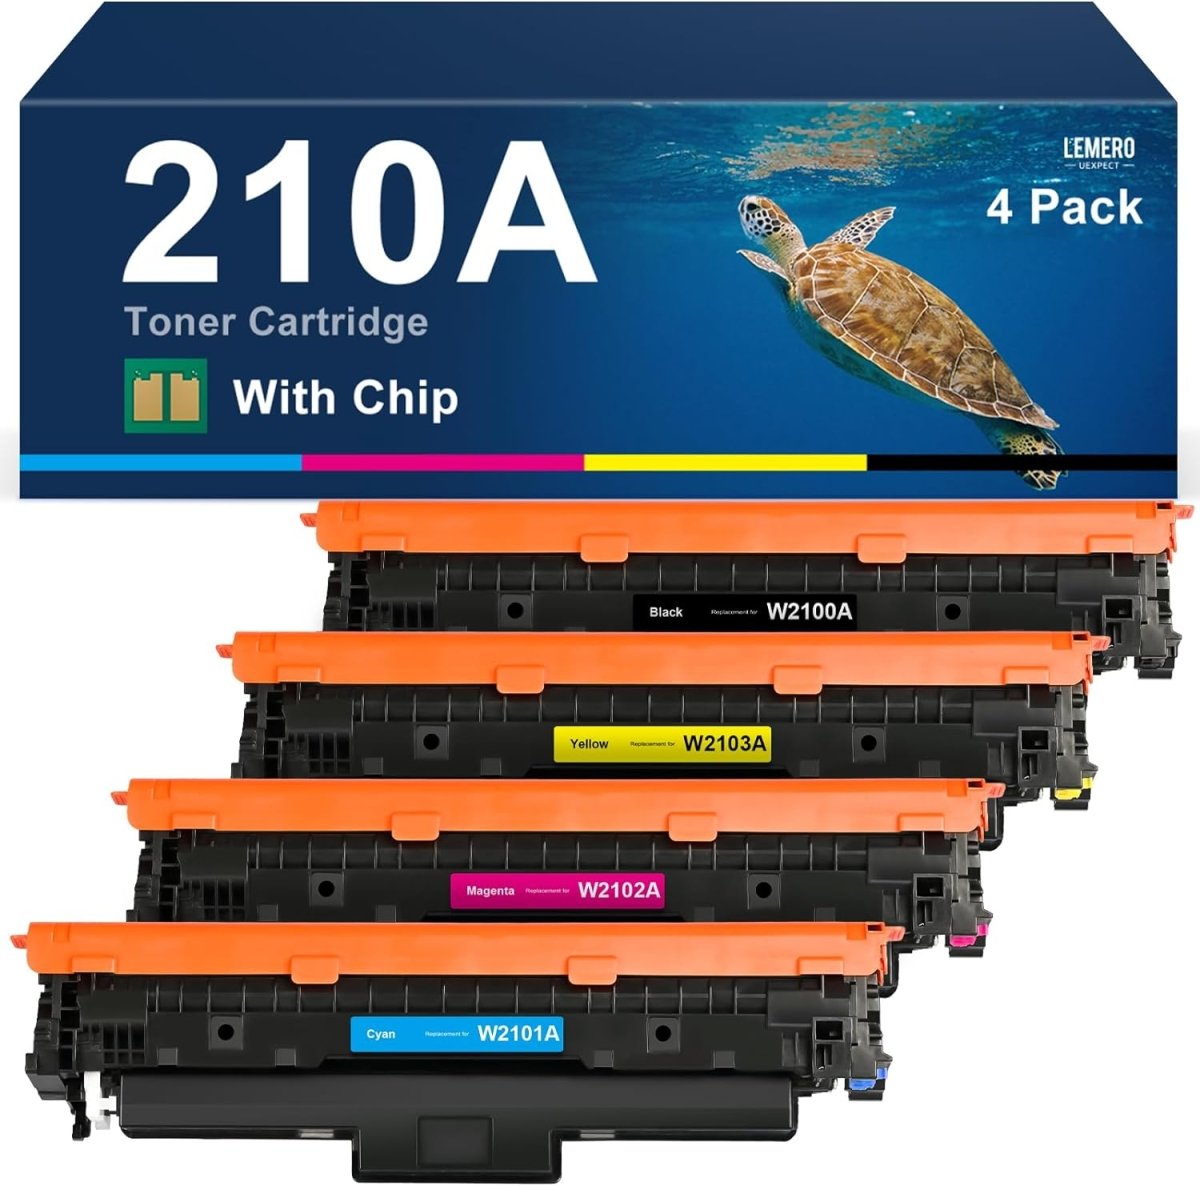 Compatible HP 210A Toner Cartridge 4-Pack with Chip,Black Cyan Magenta Yellow - Linford Office:Printer Ink & Toner Cartridge